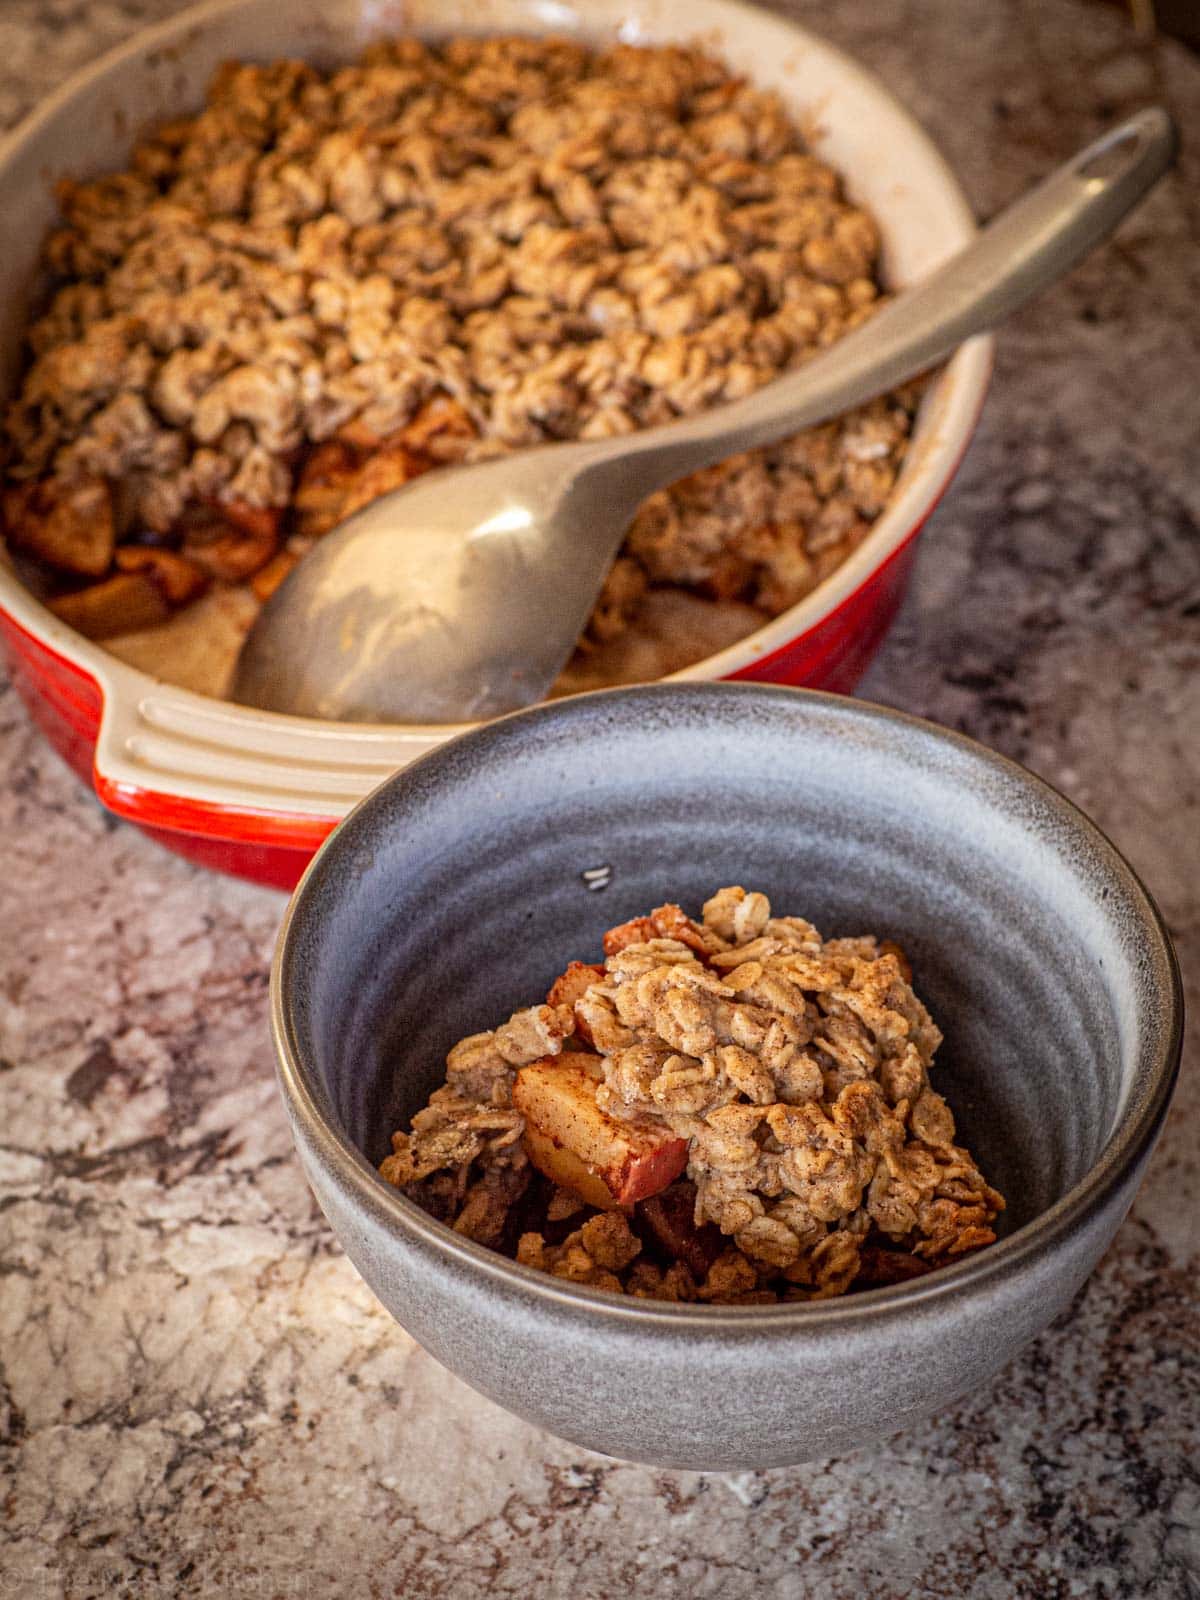 Apple crisp being scooped into a grey bowl from a red baking dish.